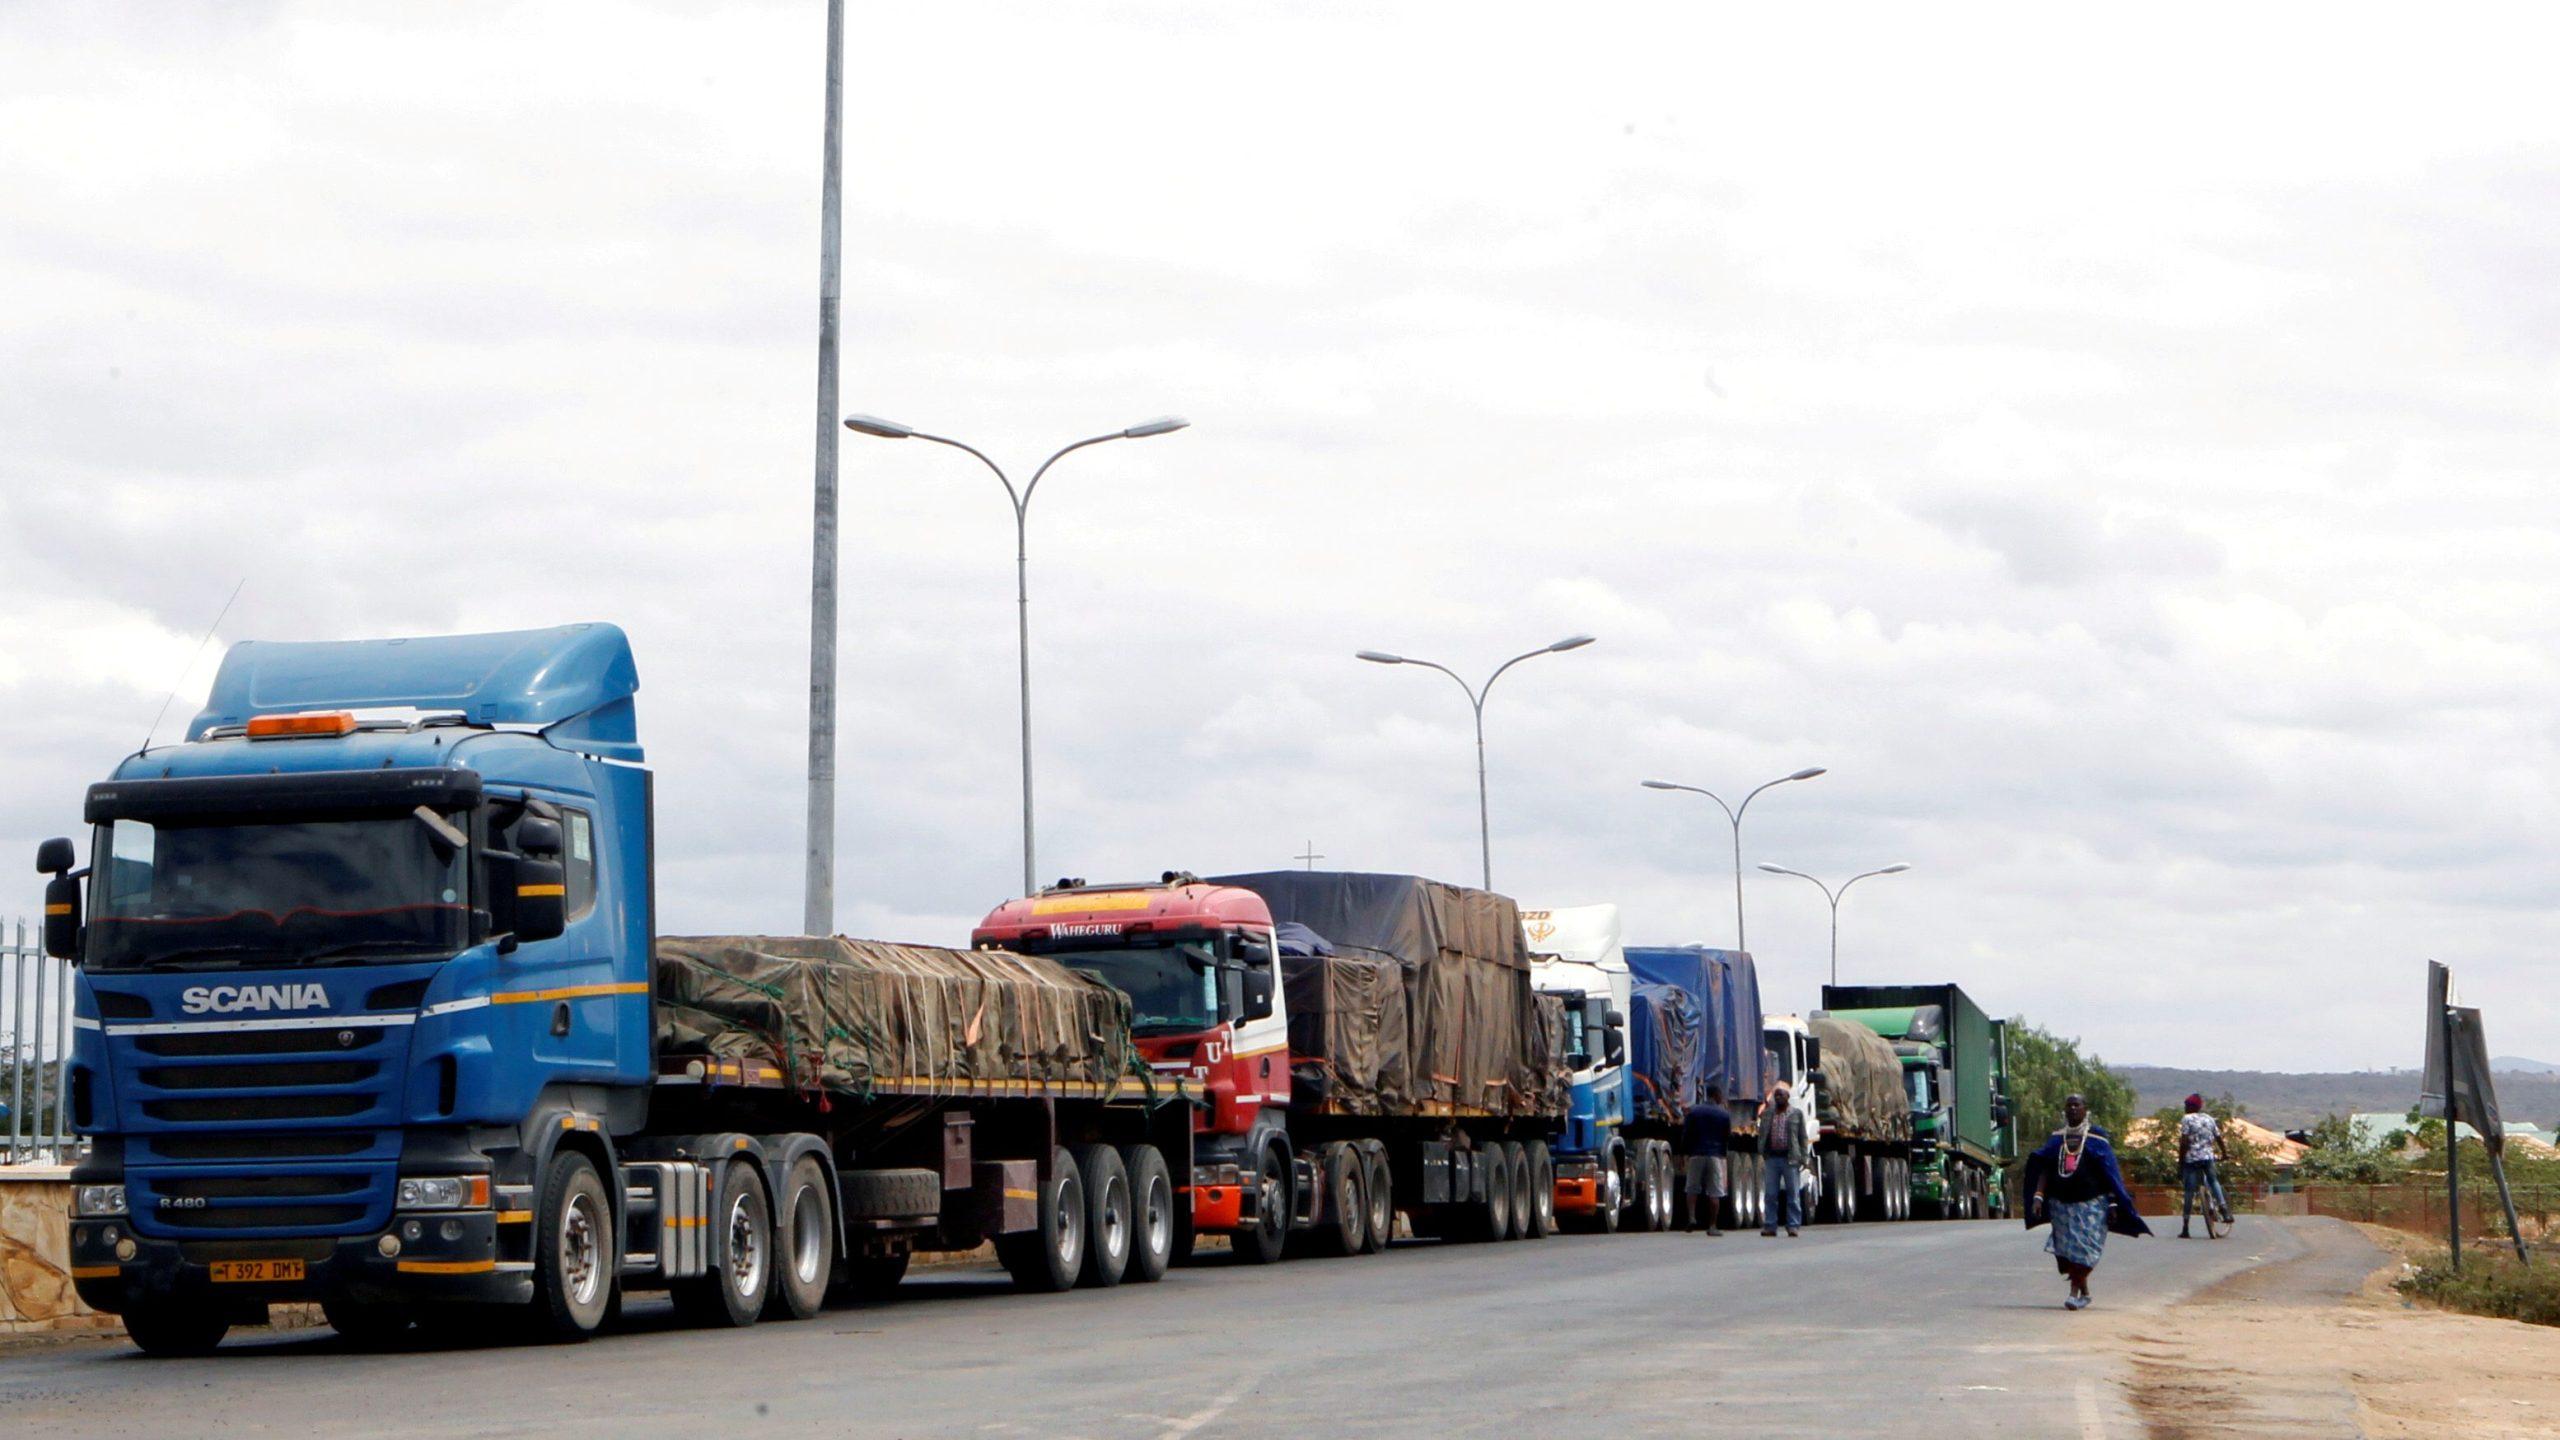 Logistics and supply chain infrastructure improves trade links across diverse African economies